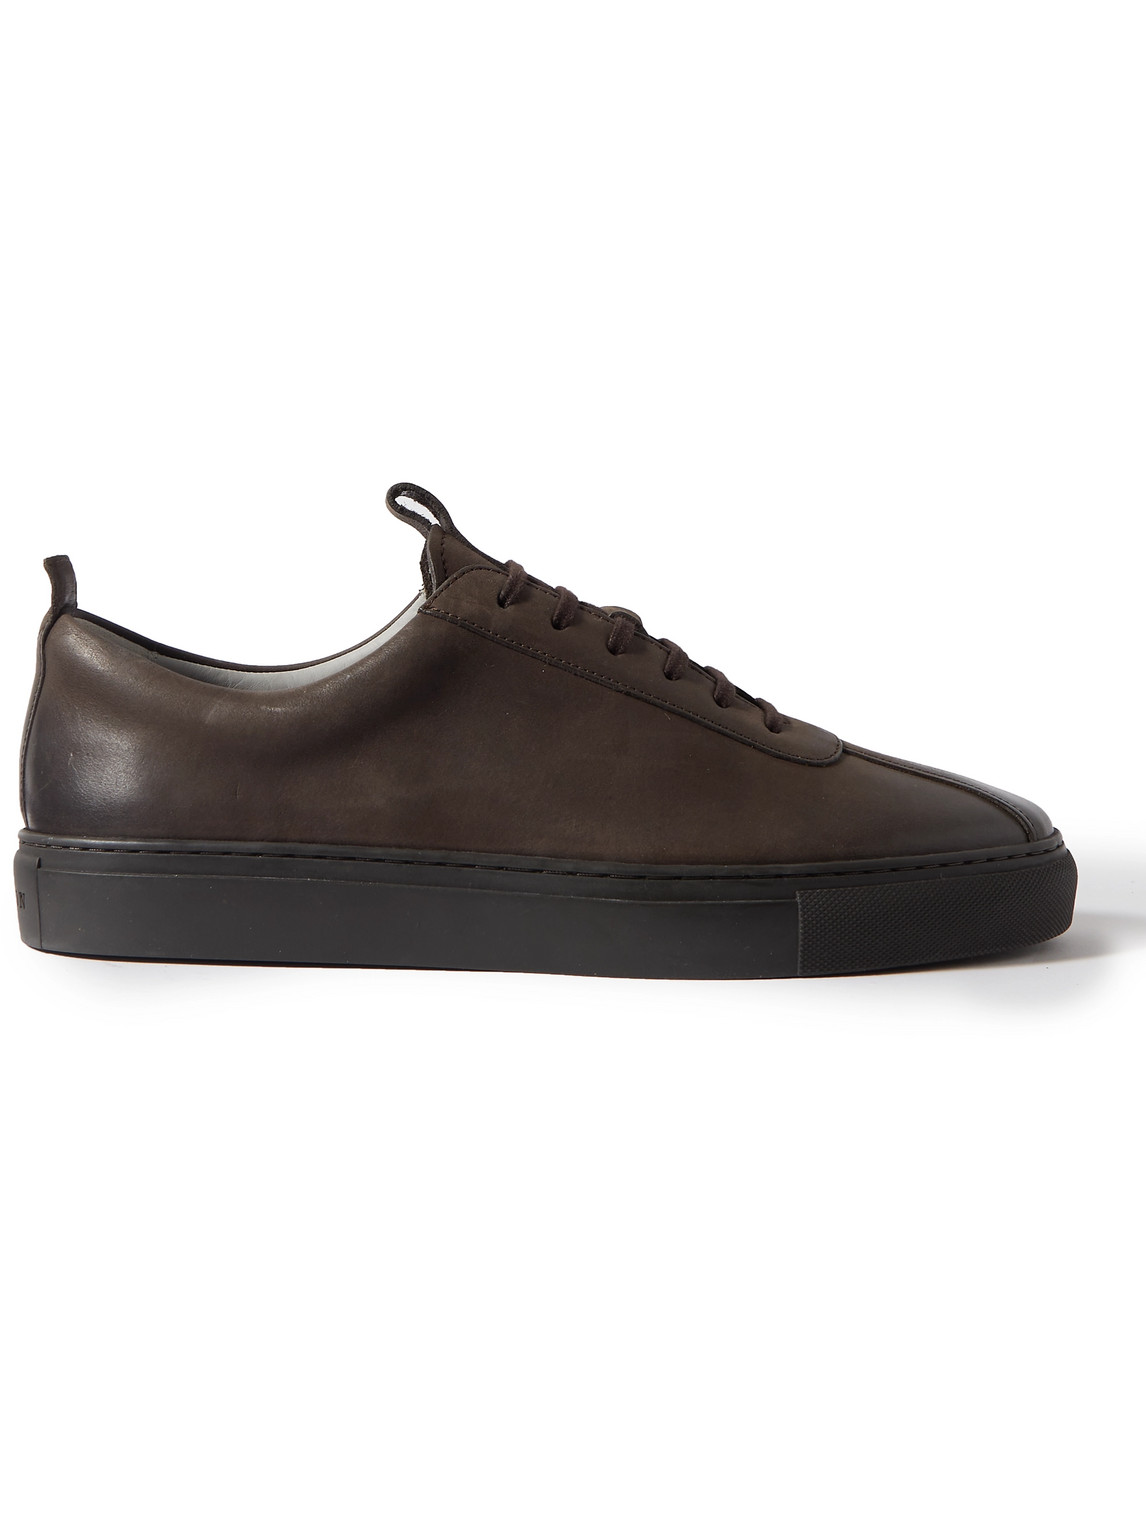 Grenson Sneaker 1 Leather Trainers In Brown